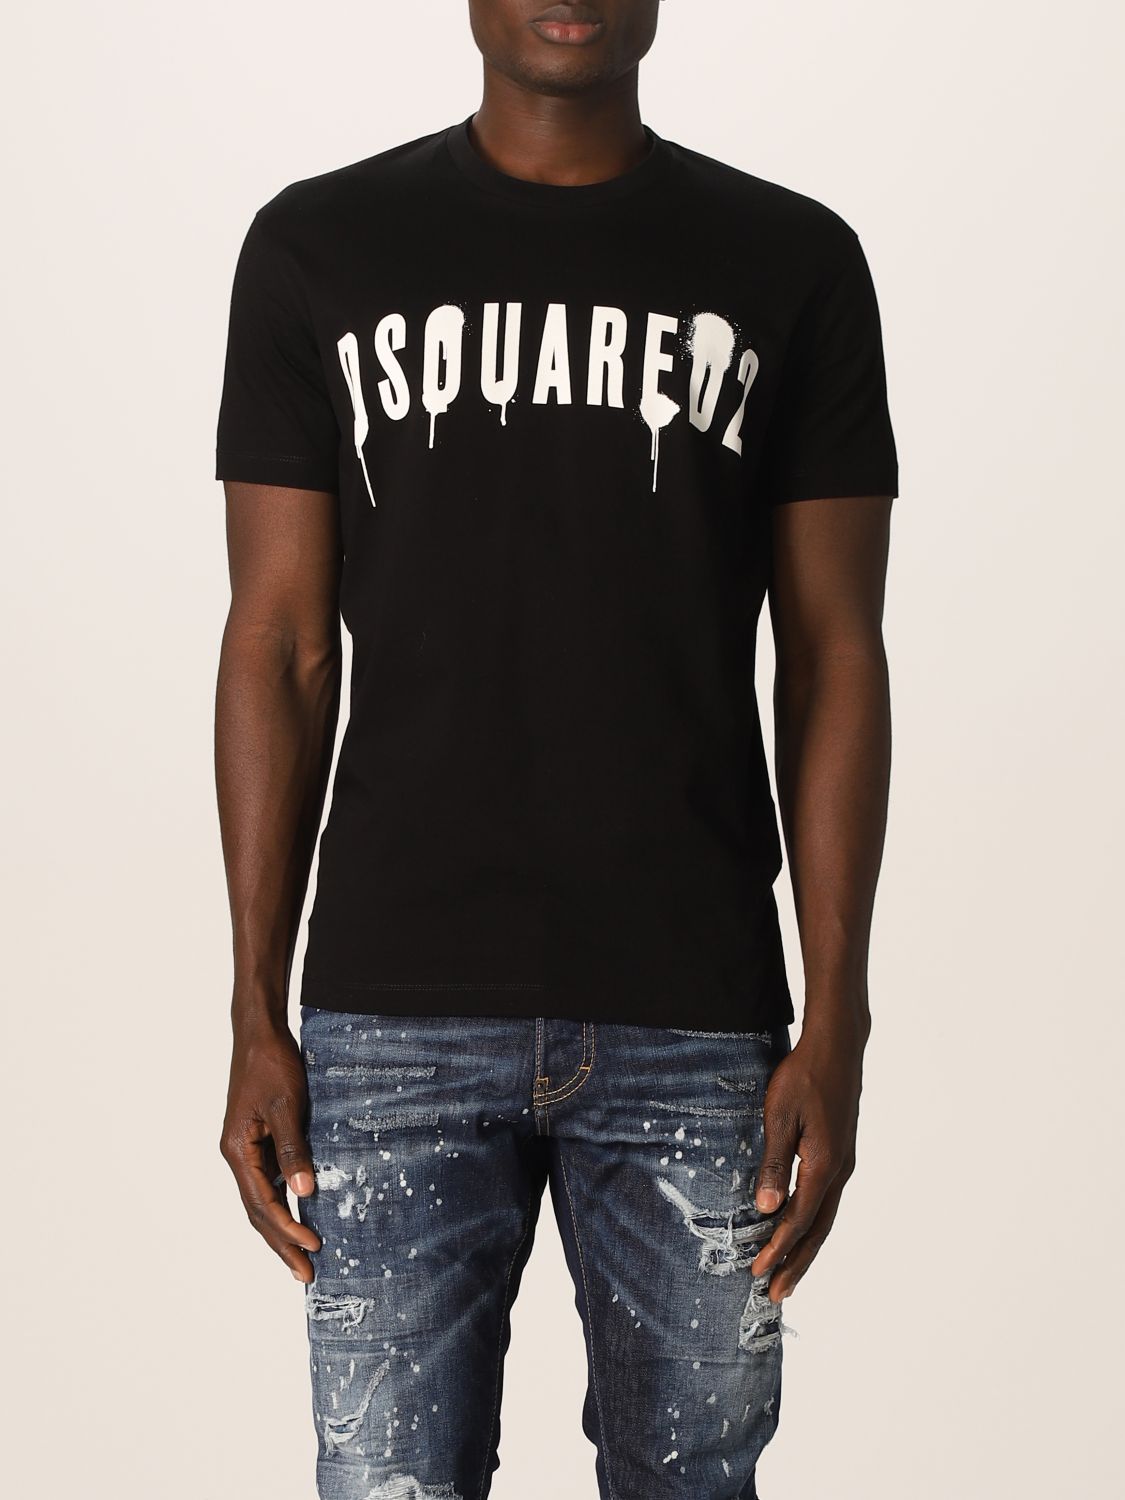 DSQUARED2: Cool T-shirt with logo - Black | Dsquared2 t-shirt ...